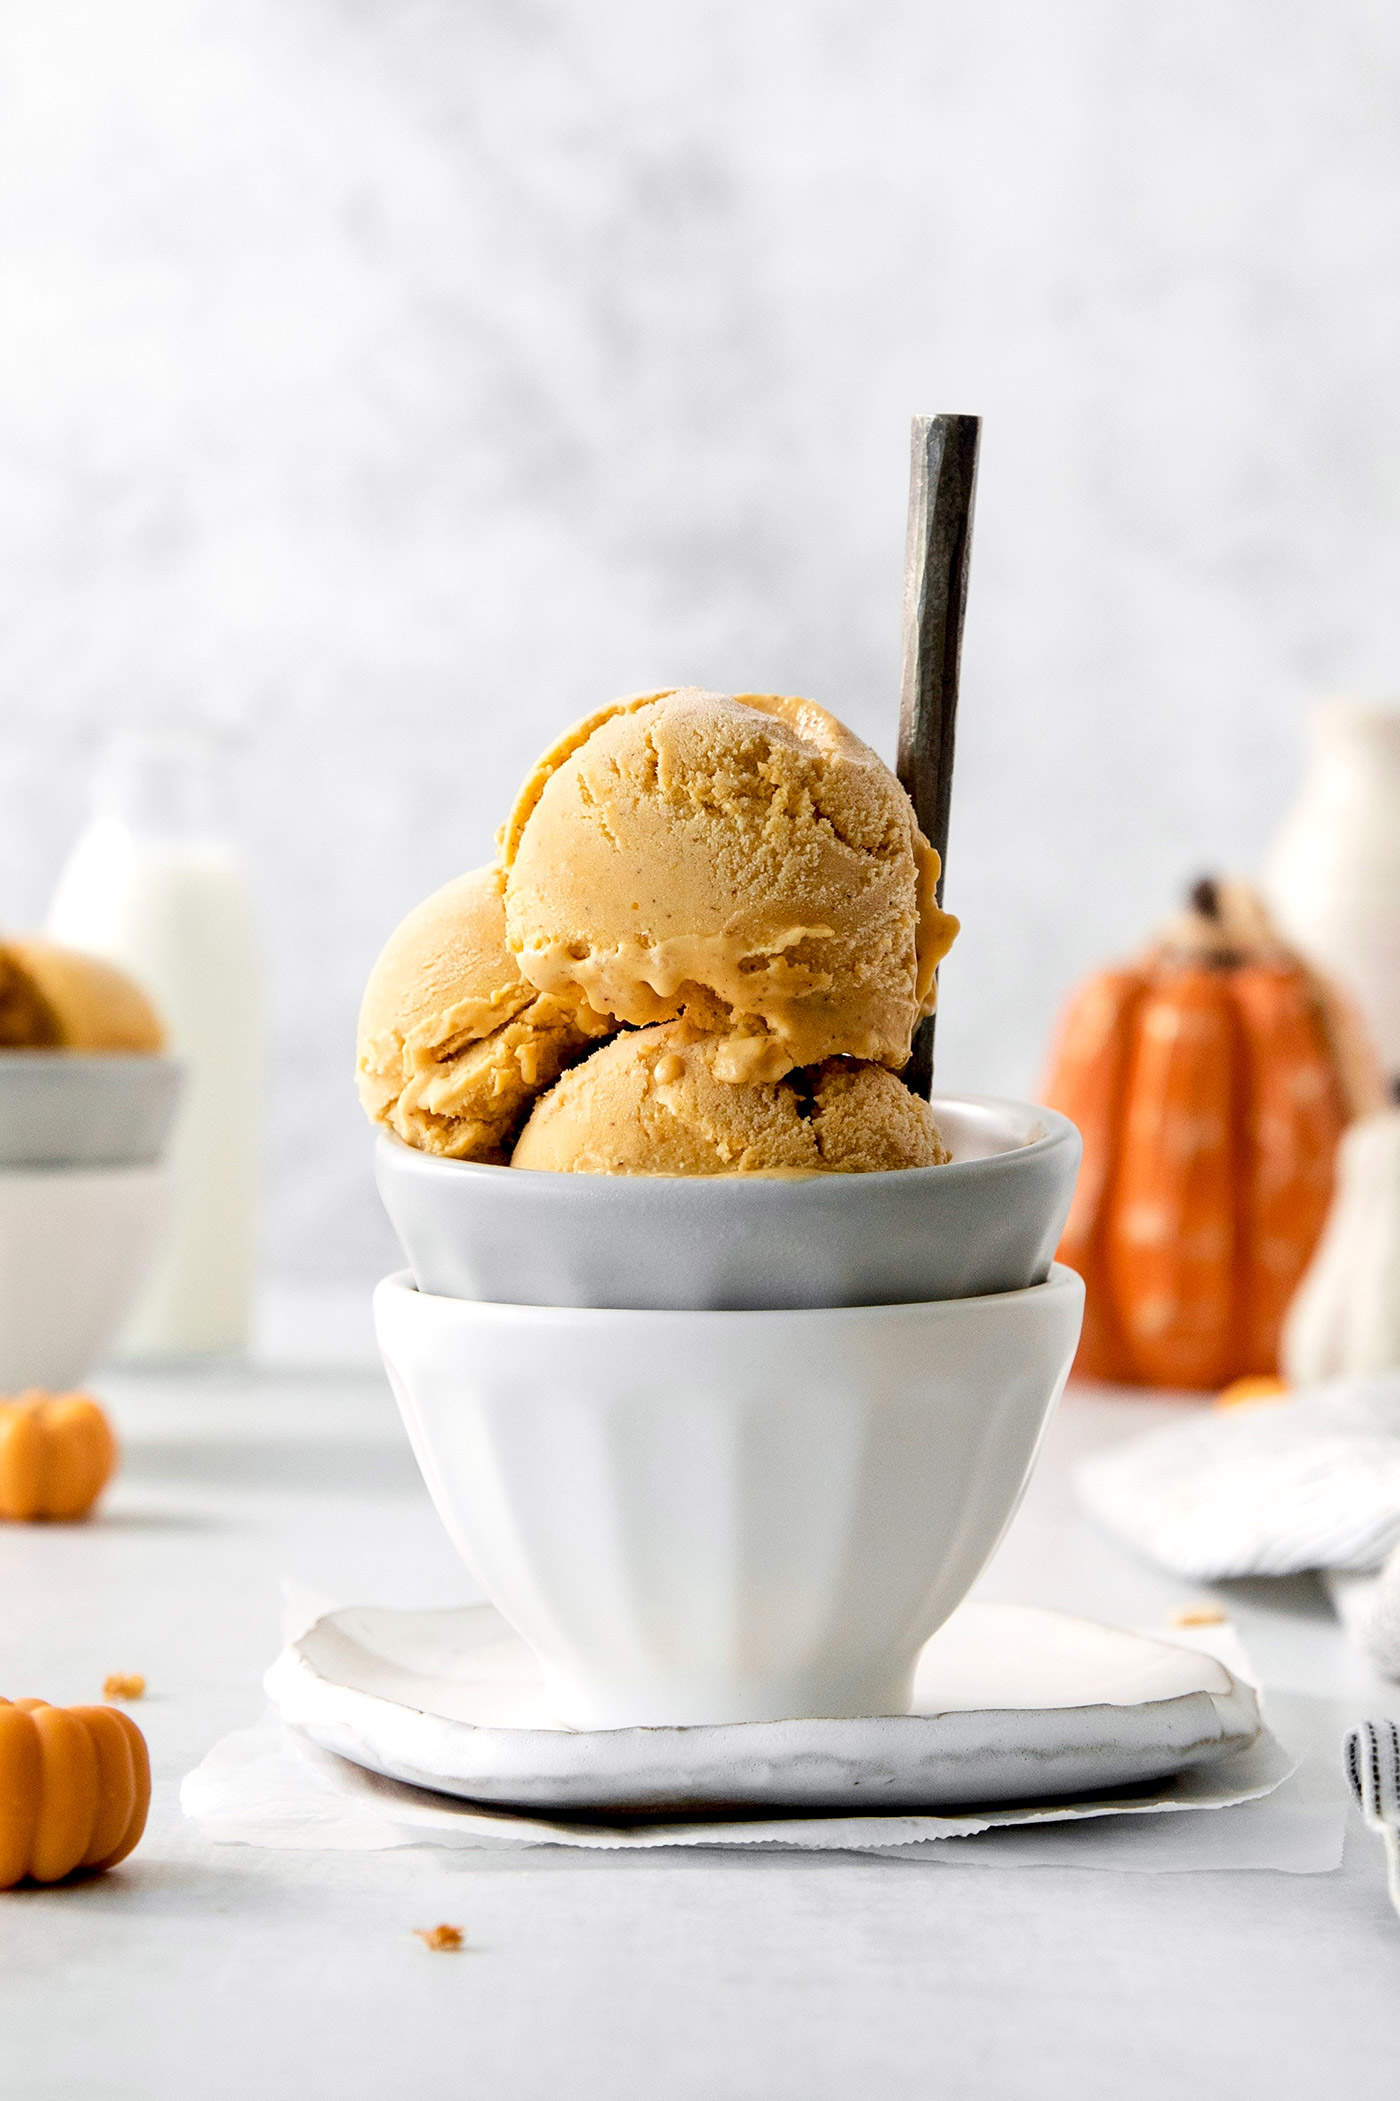 Three scoops of orange pumpkin ice cream are shown in a gray bowl stacked in a white bowl.